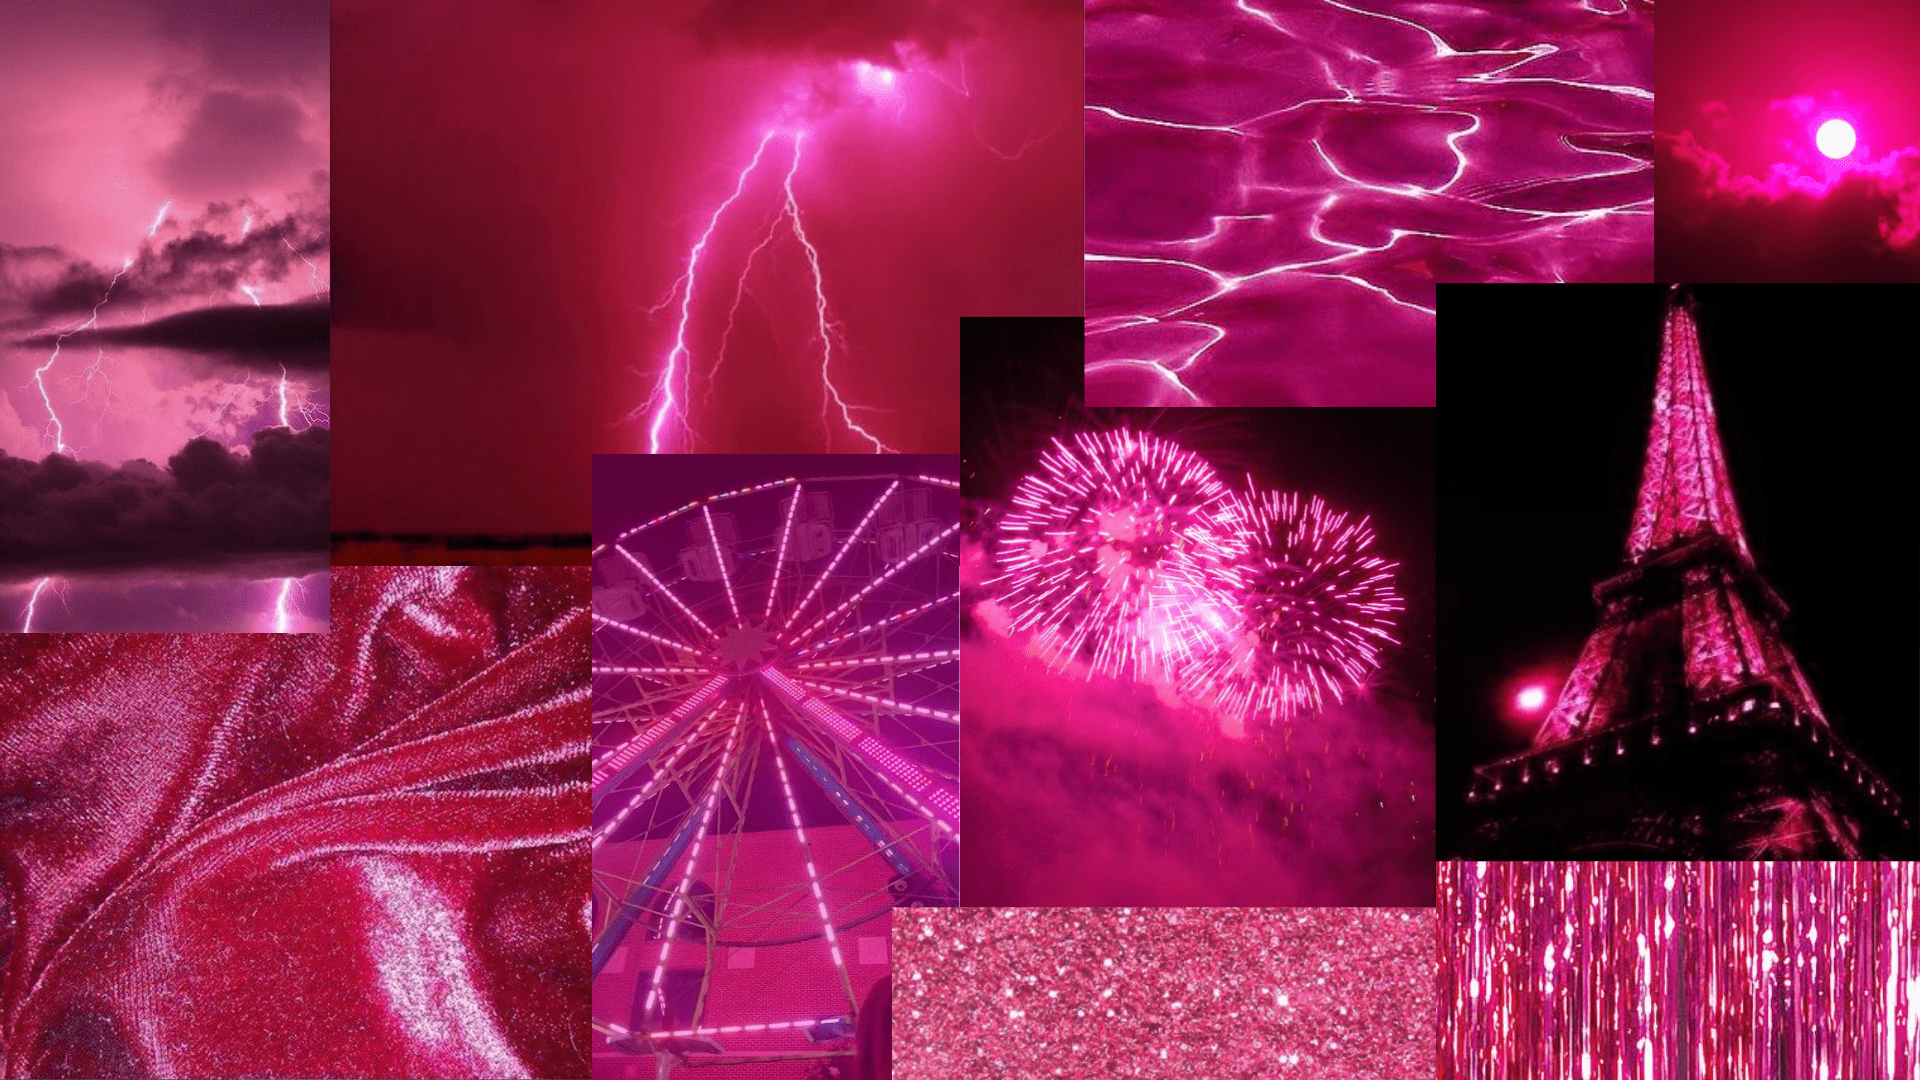 A collage of images in shades of pink, purple, and red. - Magenta